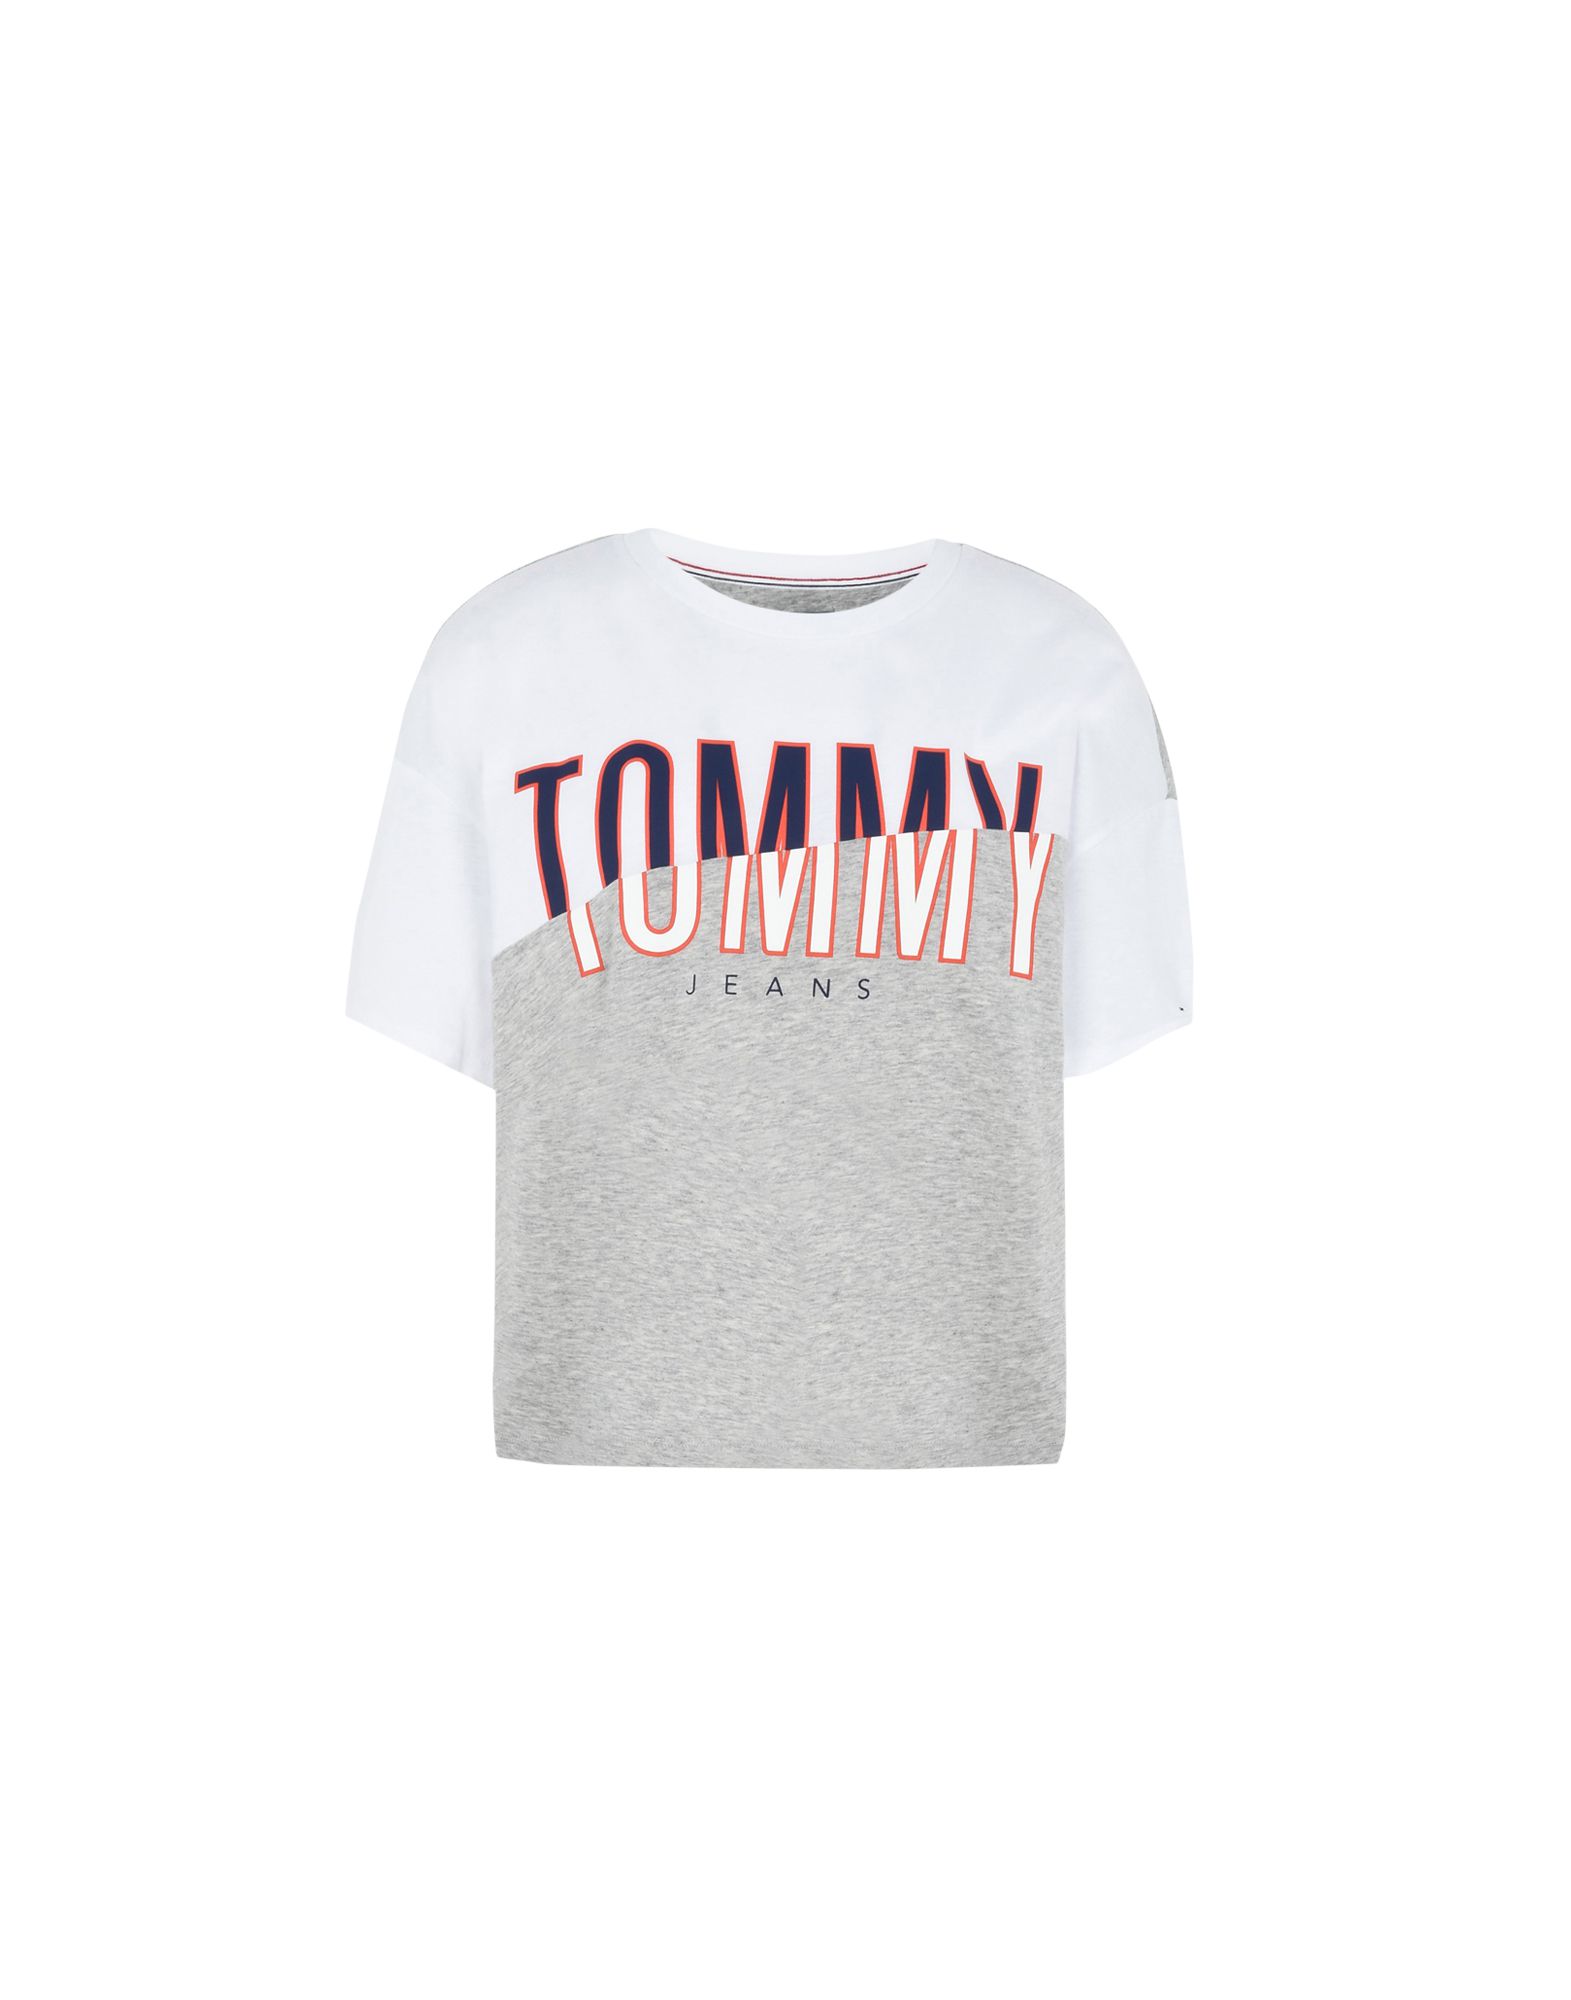 TOMMY JEANS T-shirt,12132431FN 7